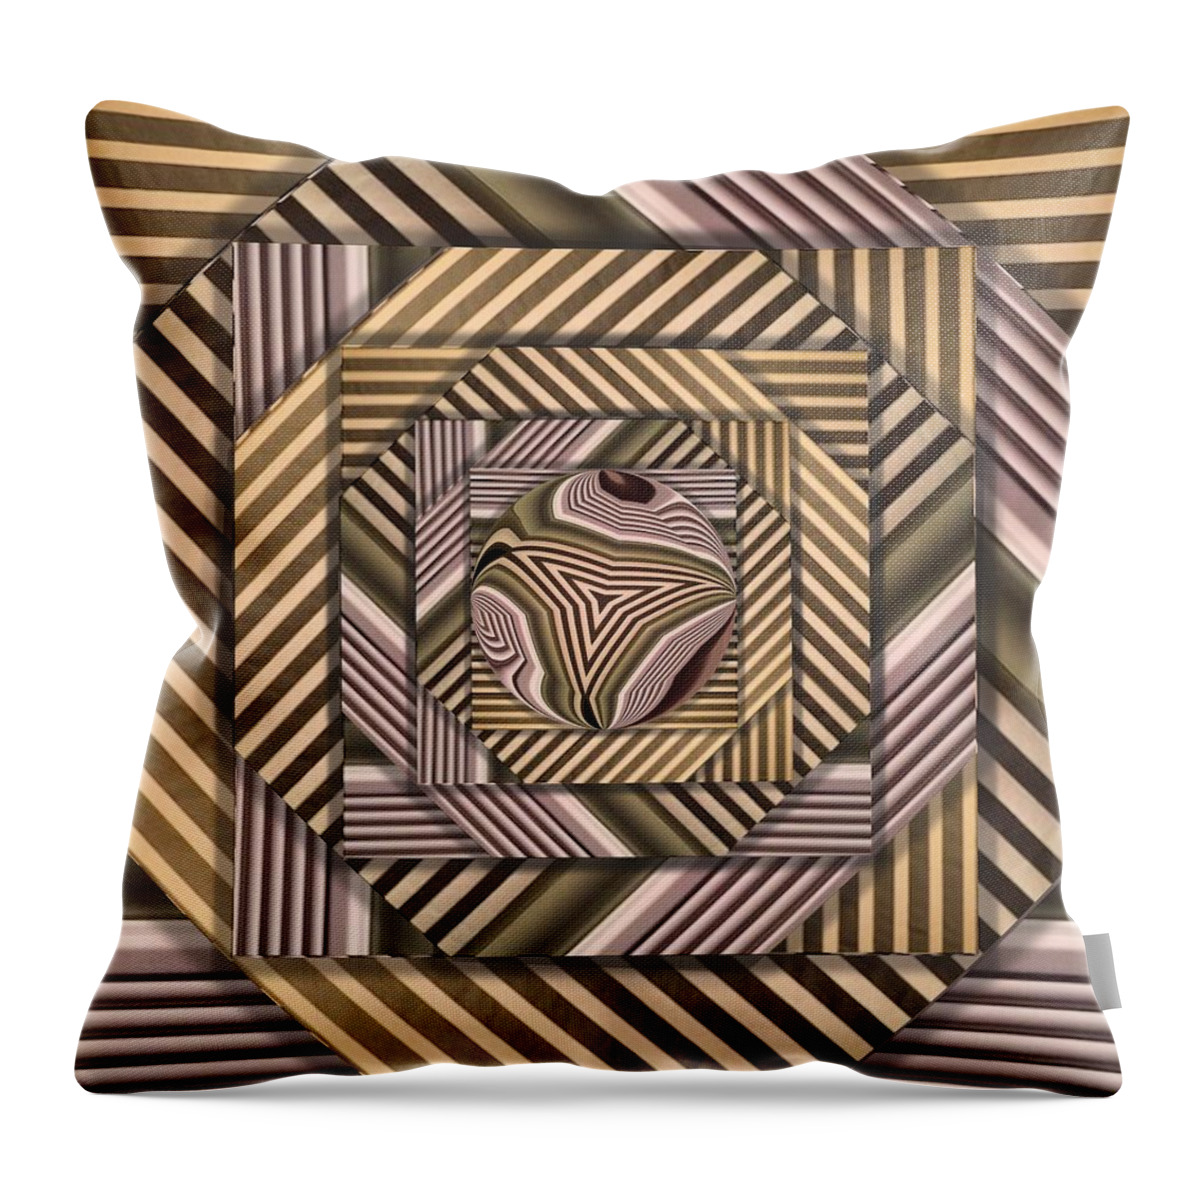 Stripes Throw Pillow featuring the digital art Line Geometry by Ron Bissett